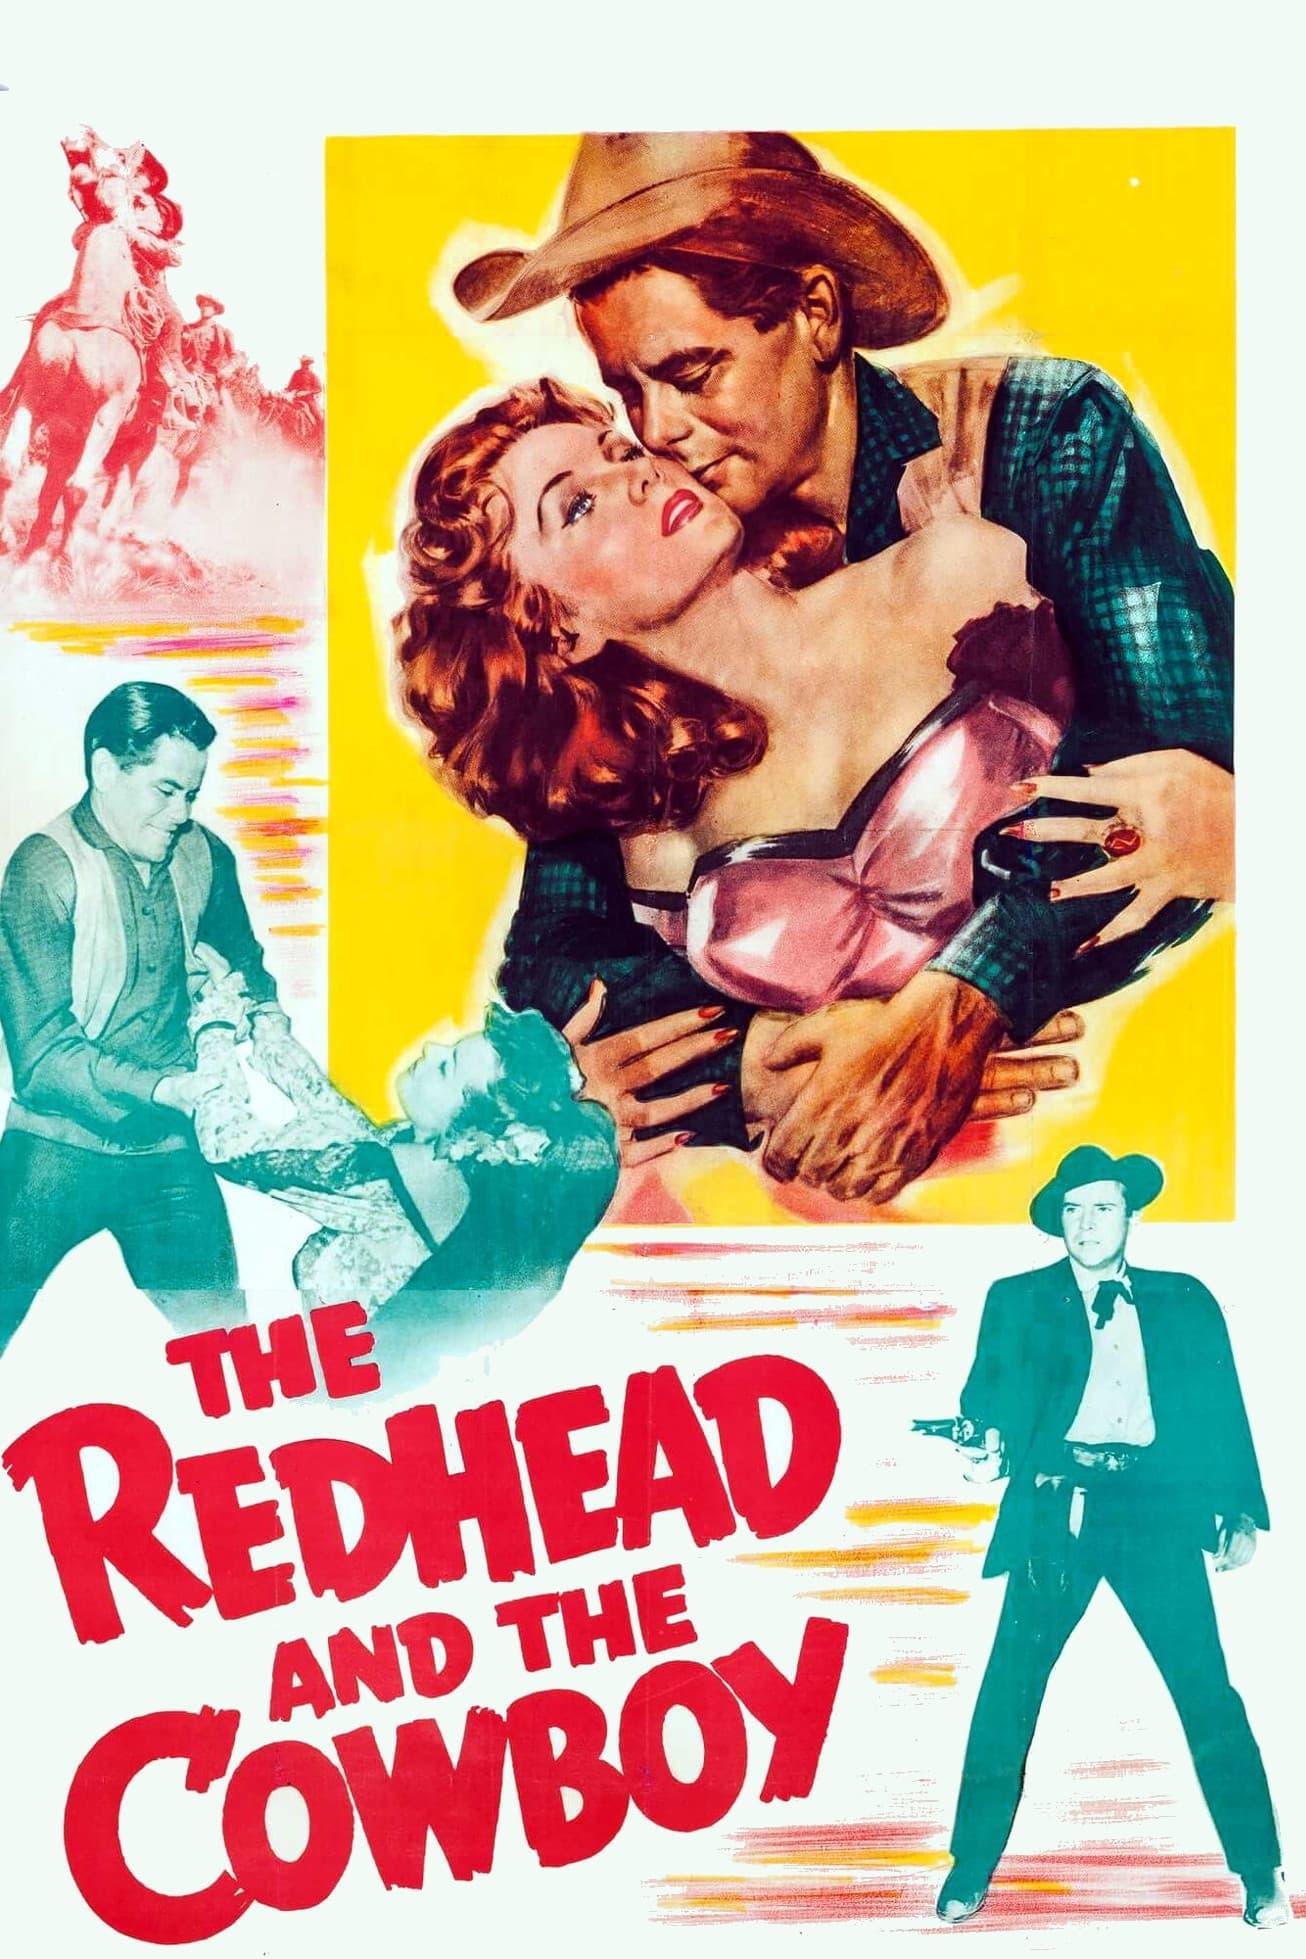 The Redhead and The Cowboy poster